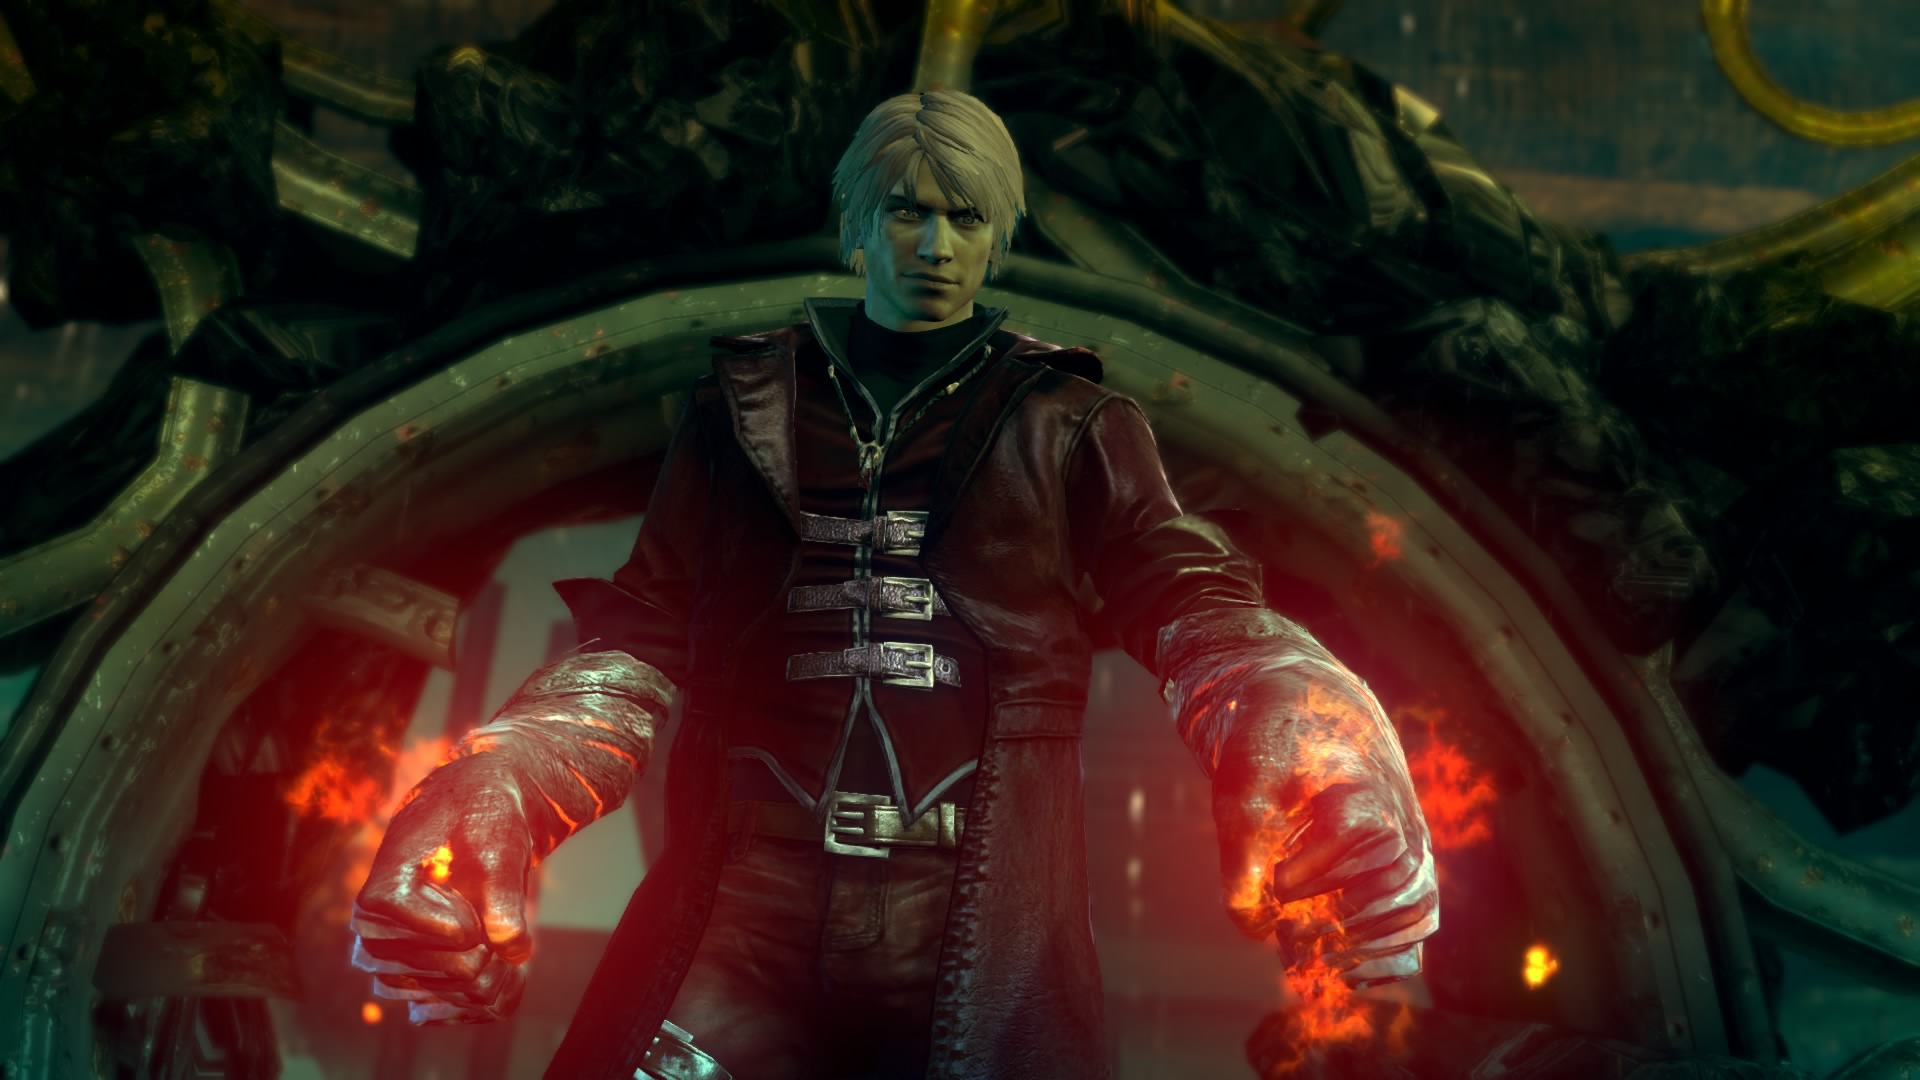 Review: DmC: Devil May Cry